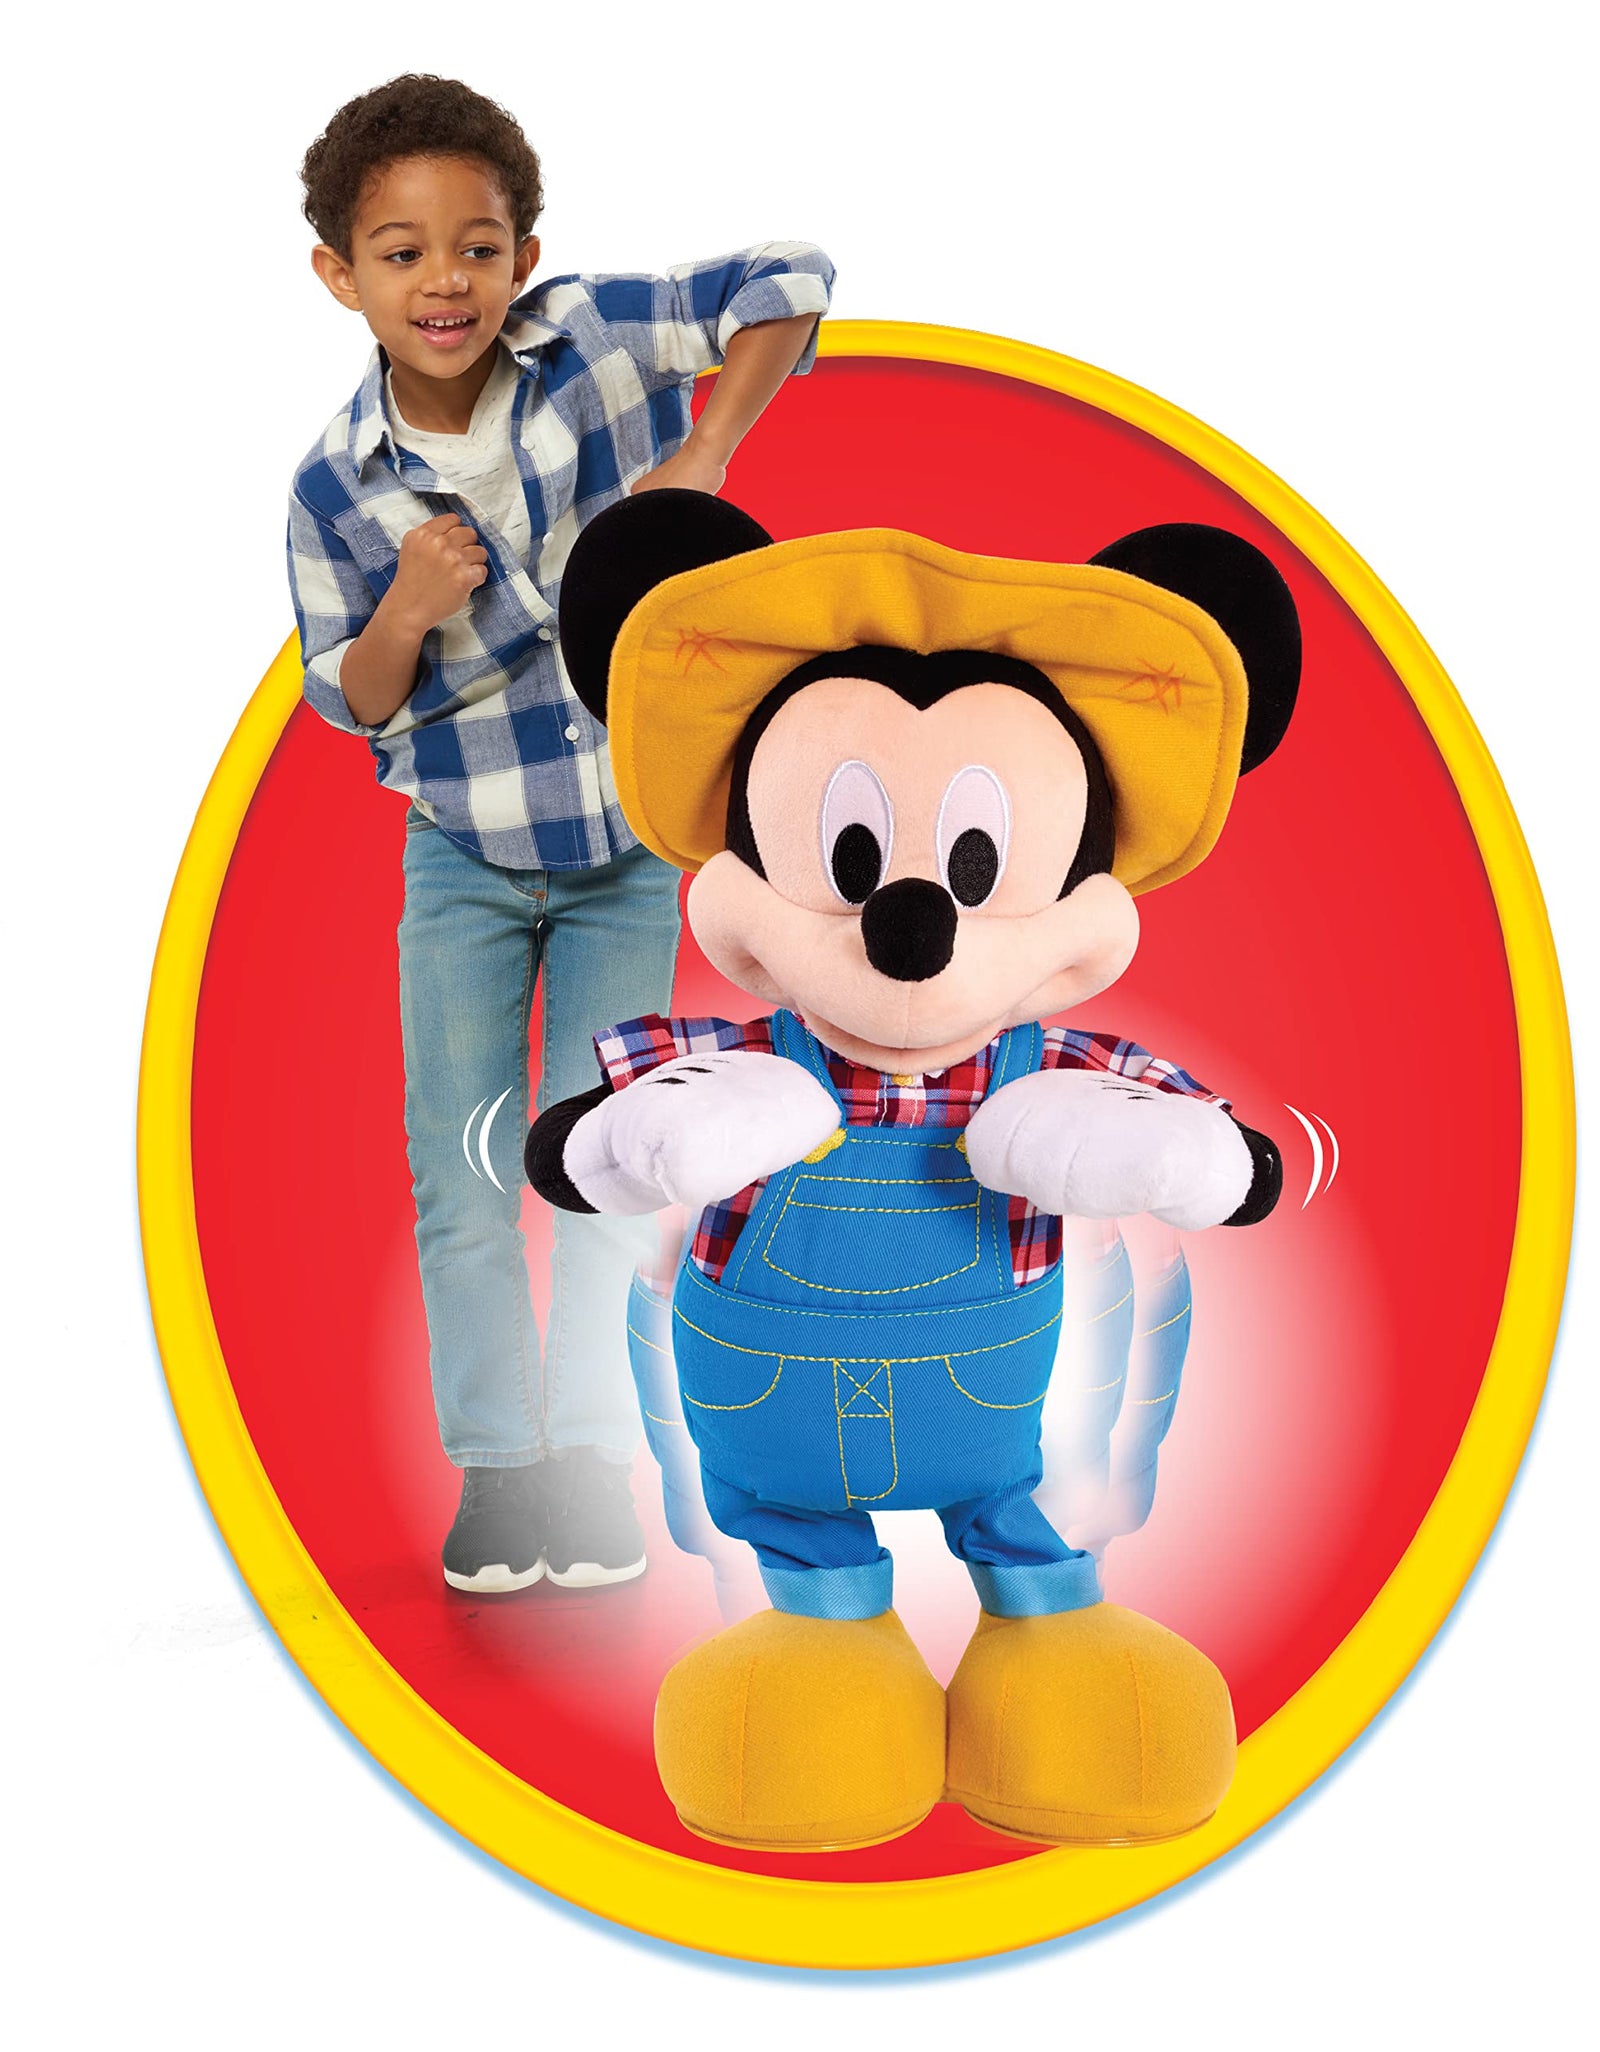 Disney Junior E-I-Oh! Mickey Mouse, Interactive Plush Toy, Sings "Old MacDonald" and Plays “What Animal Sound is That?” Game, by Just Play